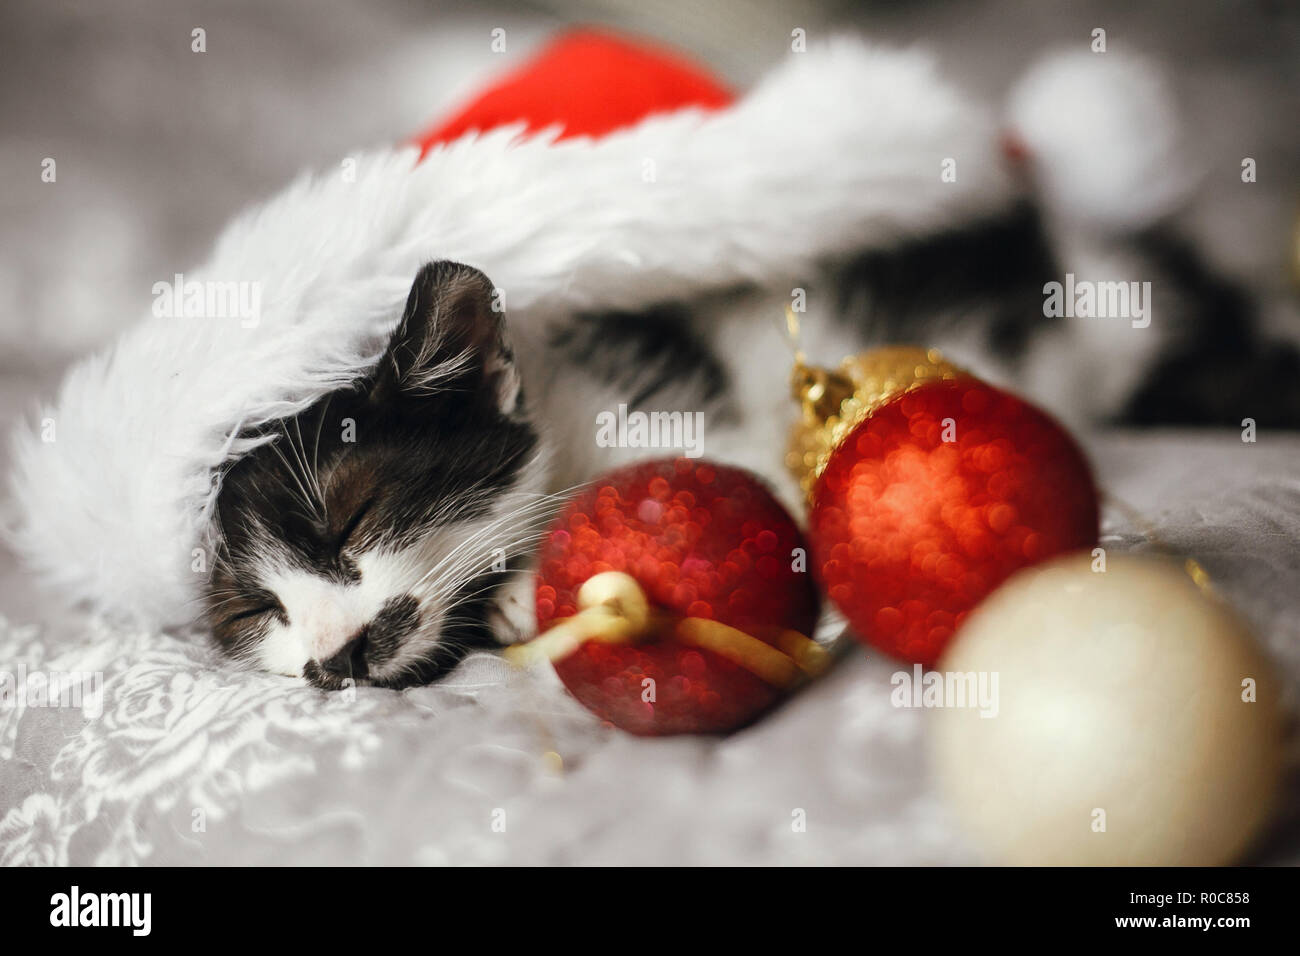 Cute kitty sleeping in santa hat on bed with gold and red christmas ornaments in festive room. Merry Christmas concept. Adorable funny kitten napping. Stock Photo